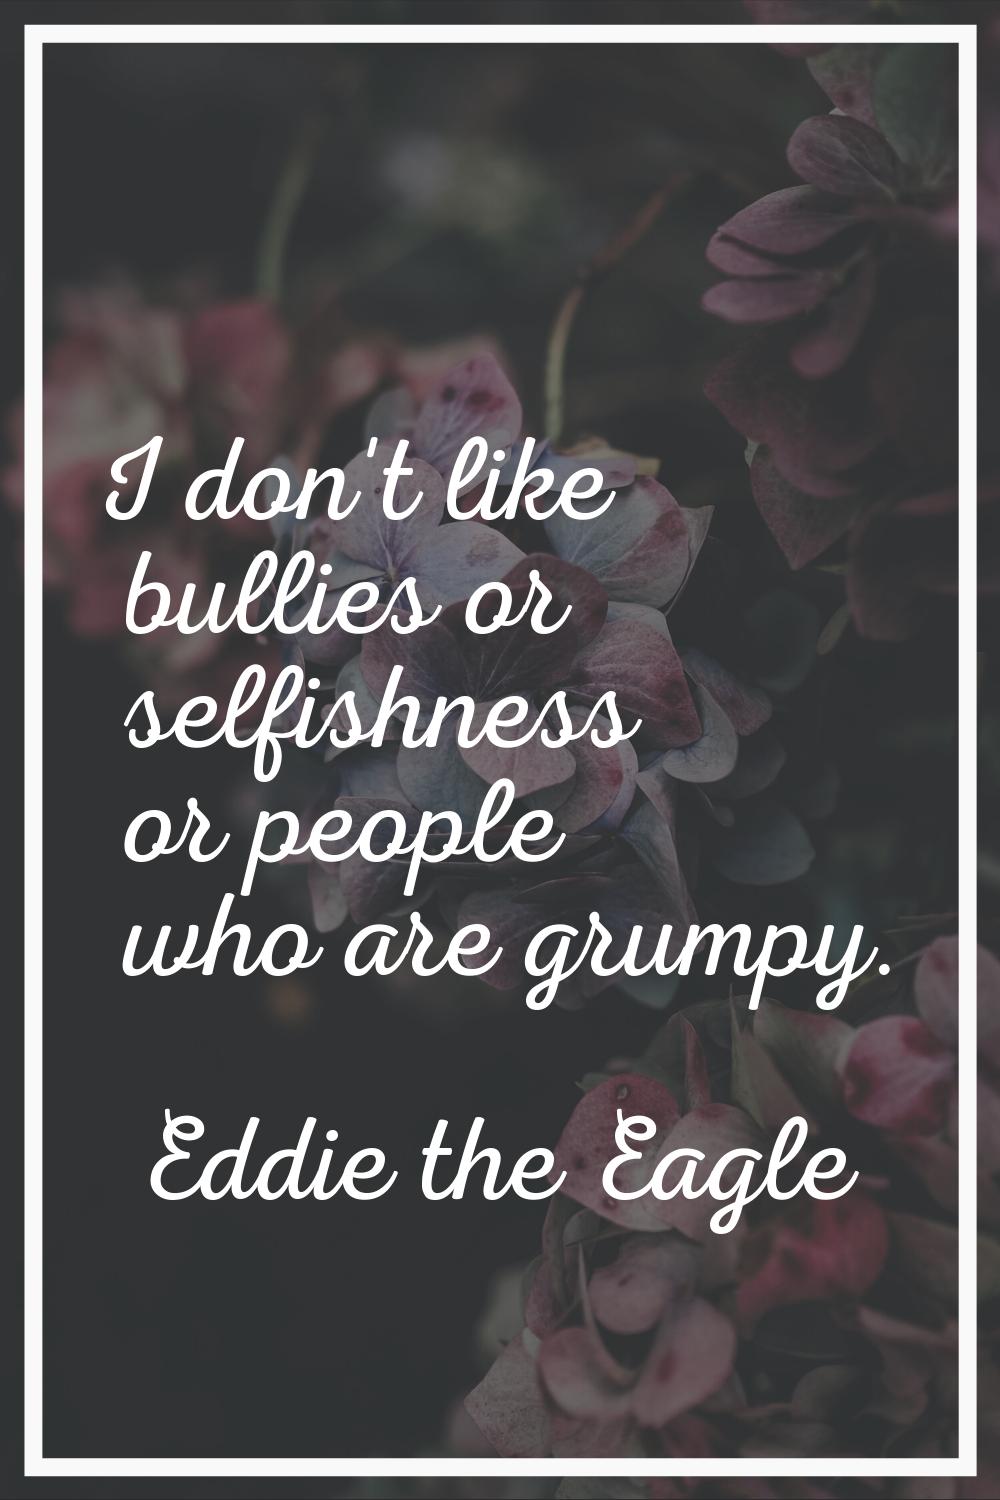 I don't like bullies or selfishness or people who are grumpy.